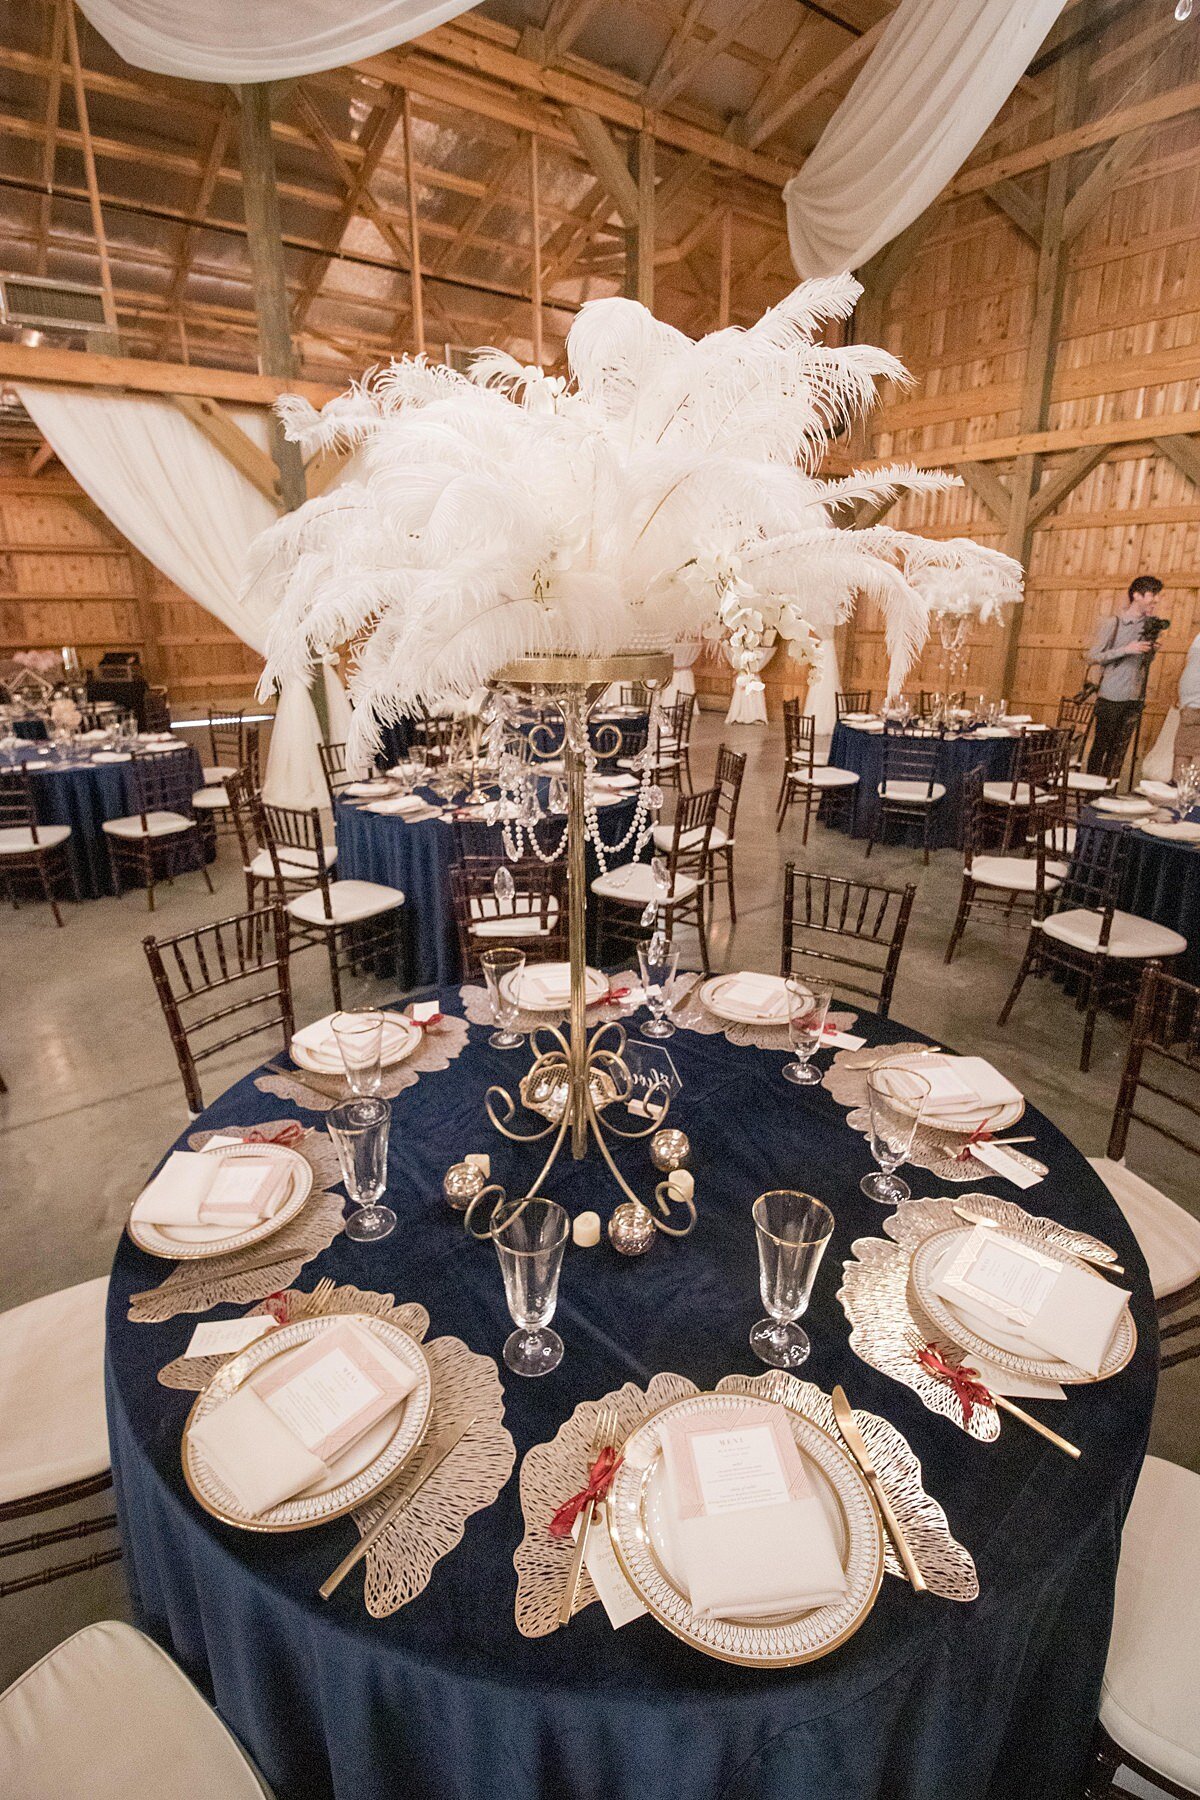 Navy blue velvet table cloths and brown chiavari chairs with white cushions decorate the reception tables at this art deco themed 1920s wedding reception at Saddle Woods Farm. The tables are set with gold ginko leaf chairgers, ivory and gold china plates and menu cards wrapped in champagne linen napkins. The matte gold flatware has a small thank you note tied to each fork and there is a footed crystal water goblet with a gold rim at each place setting. The centerpiece is a tall godl stand with hanging crystals and it is topped with a large plume of white ostrich feathers.